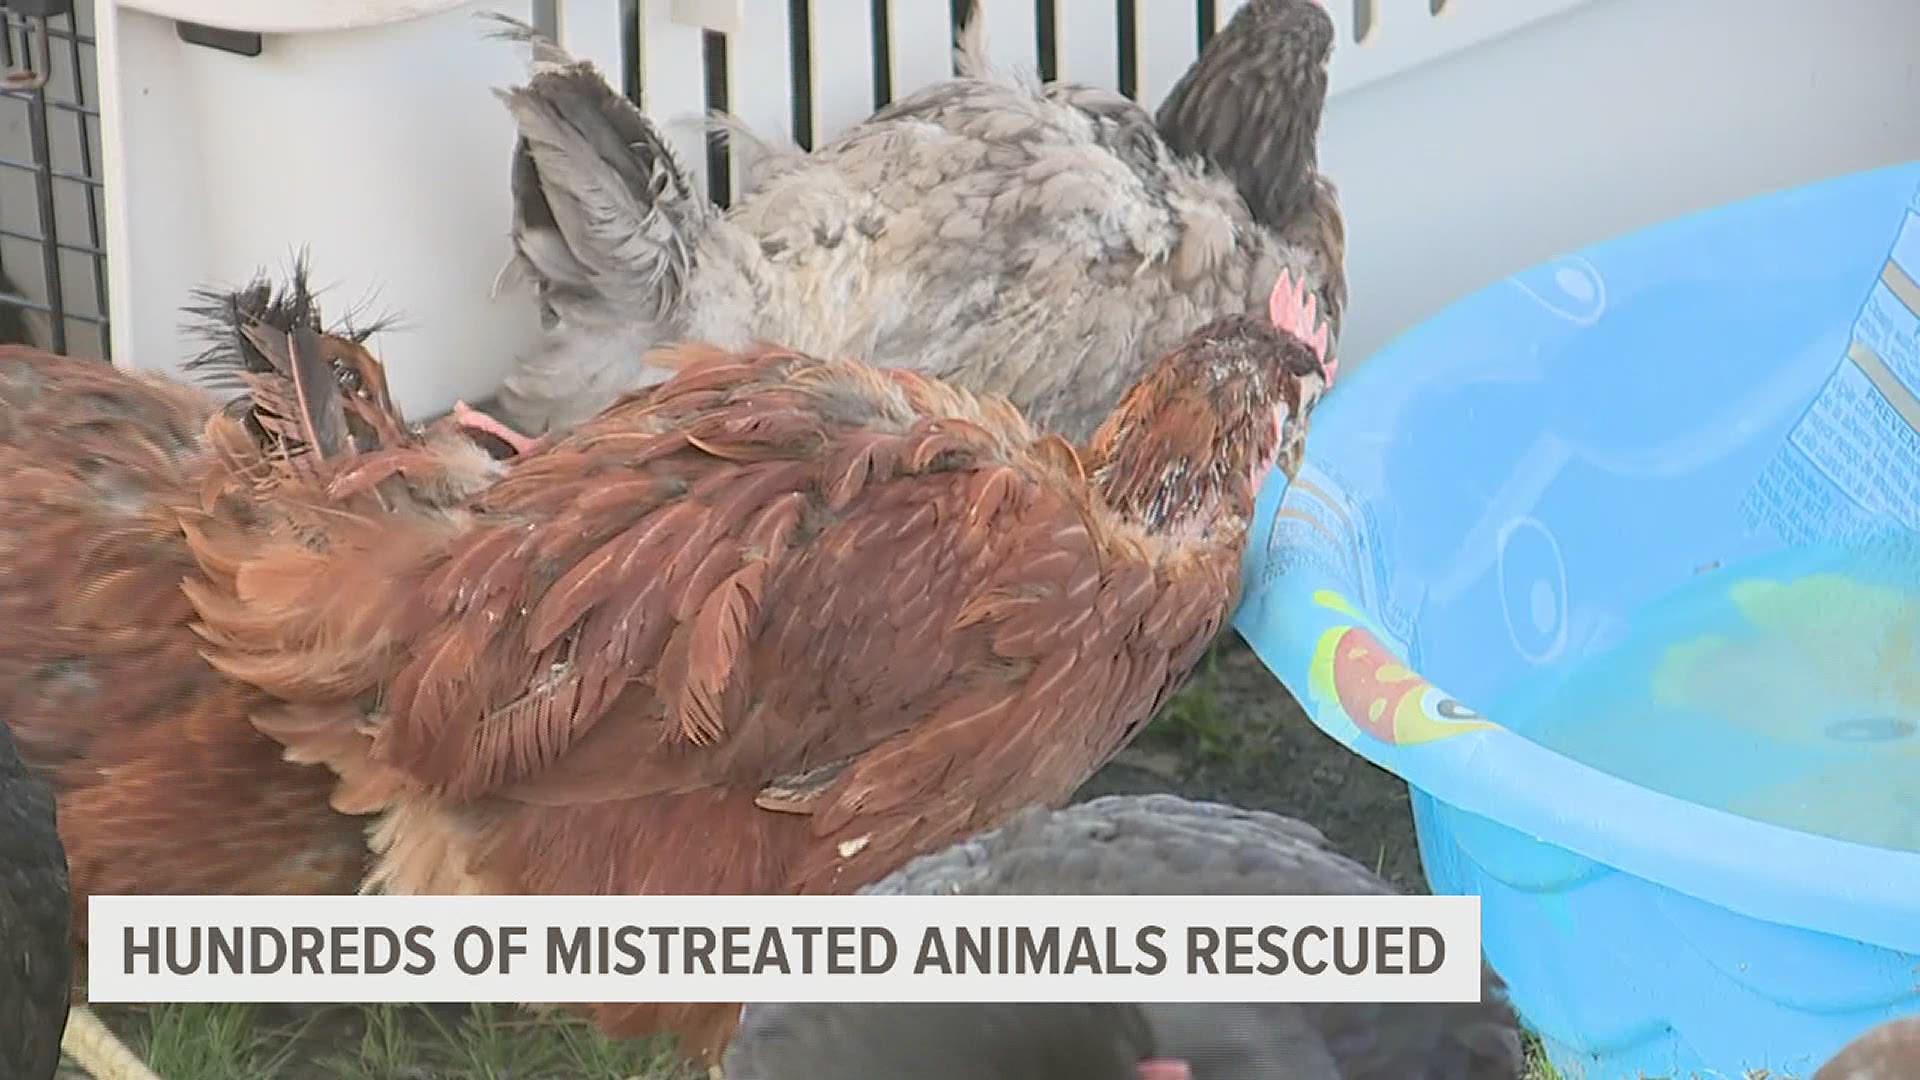 Animal rescue asks for help caring for hundreds of mistreated farm animals  